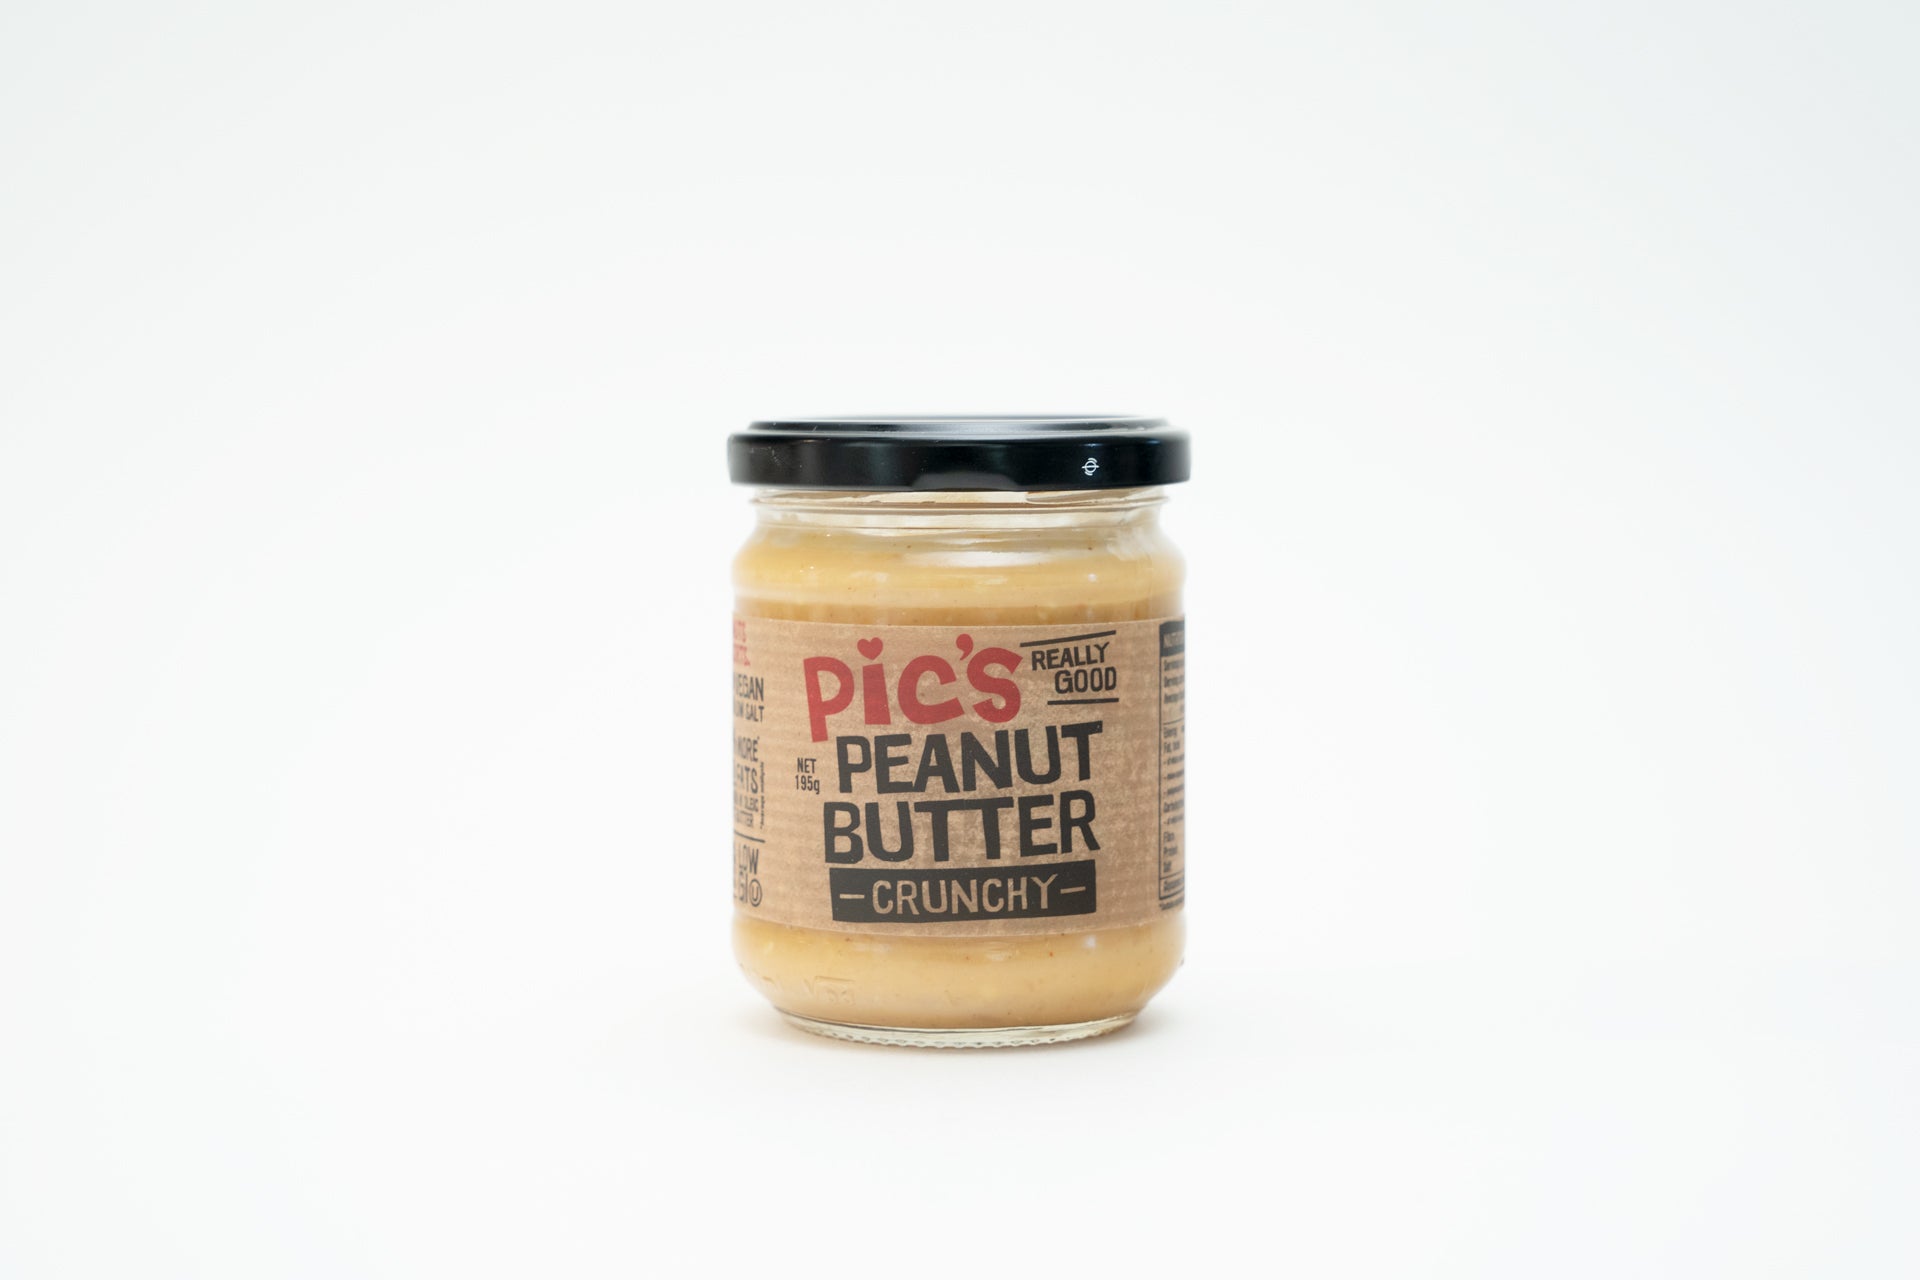 PIC'S PEANUTS BUTTER